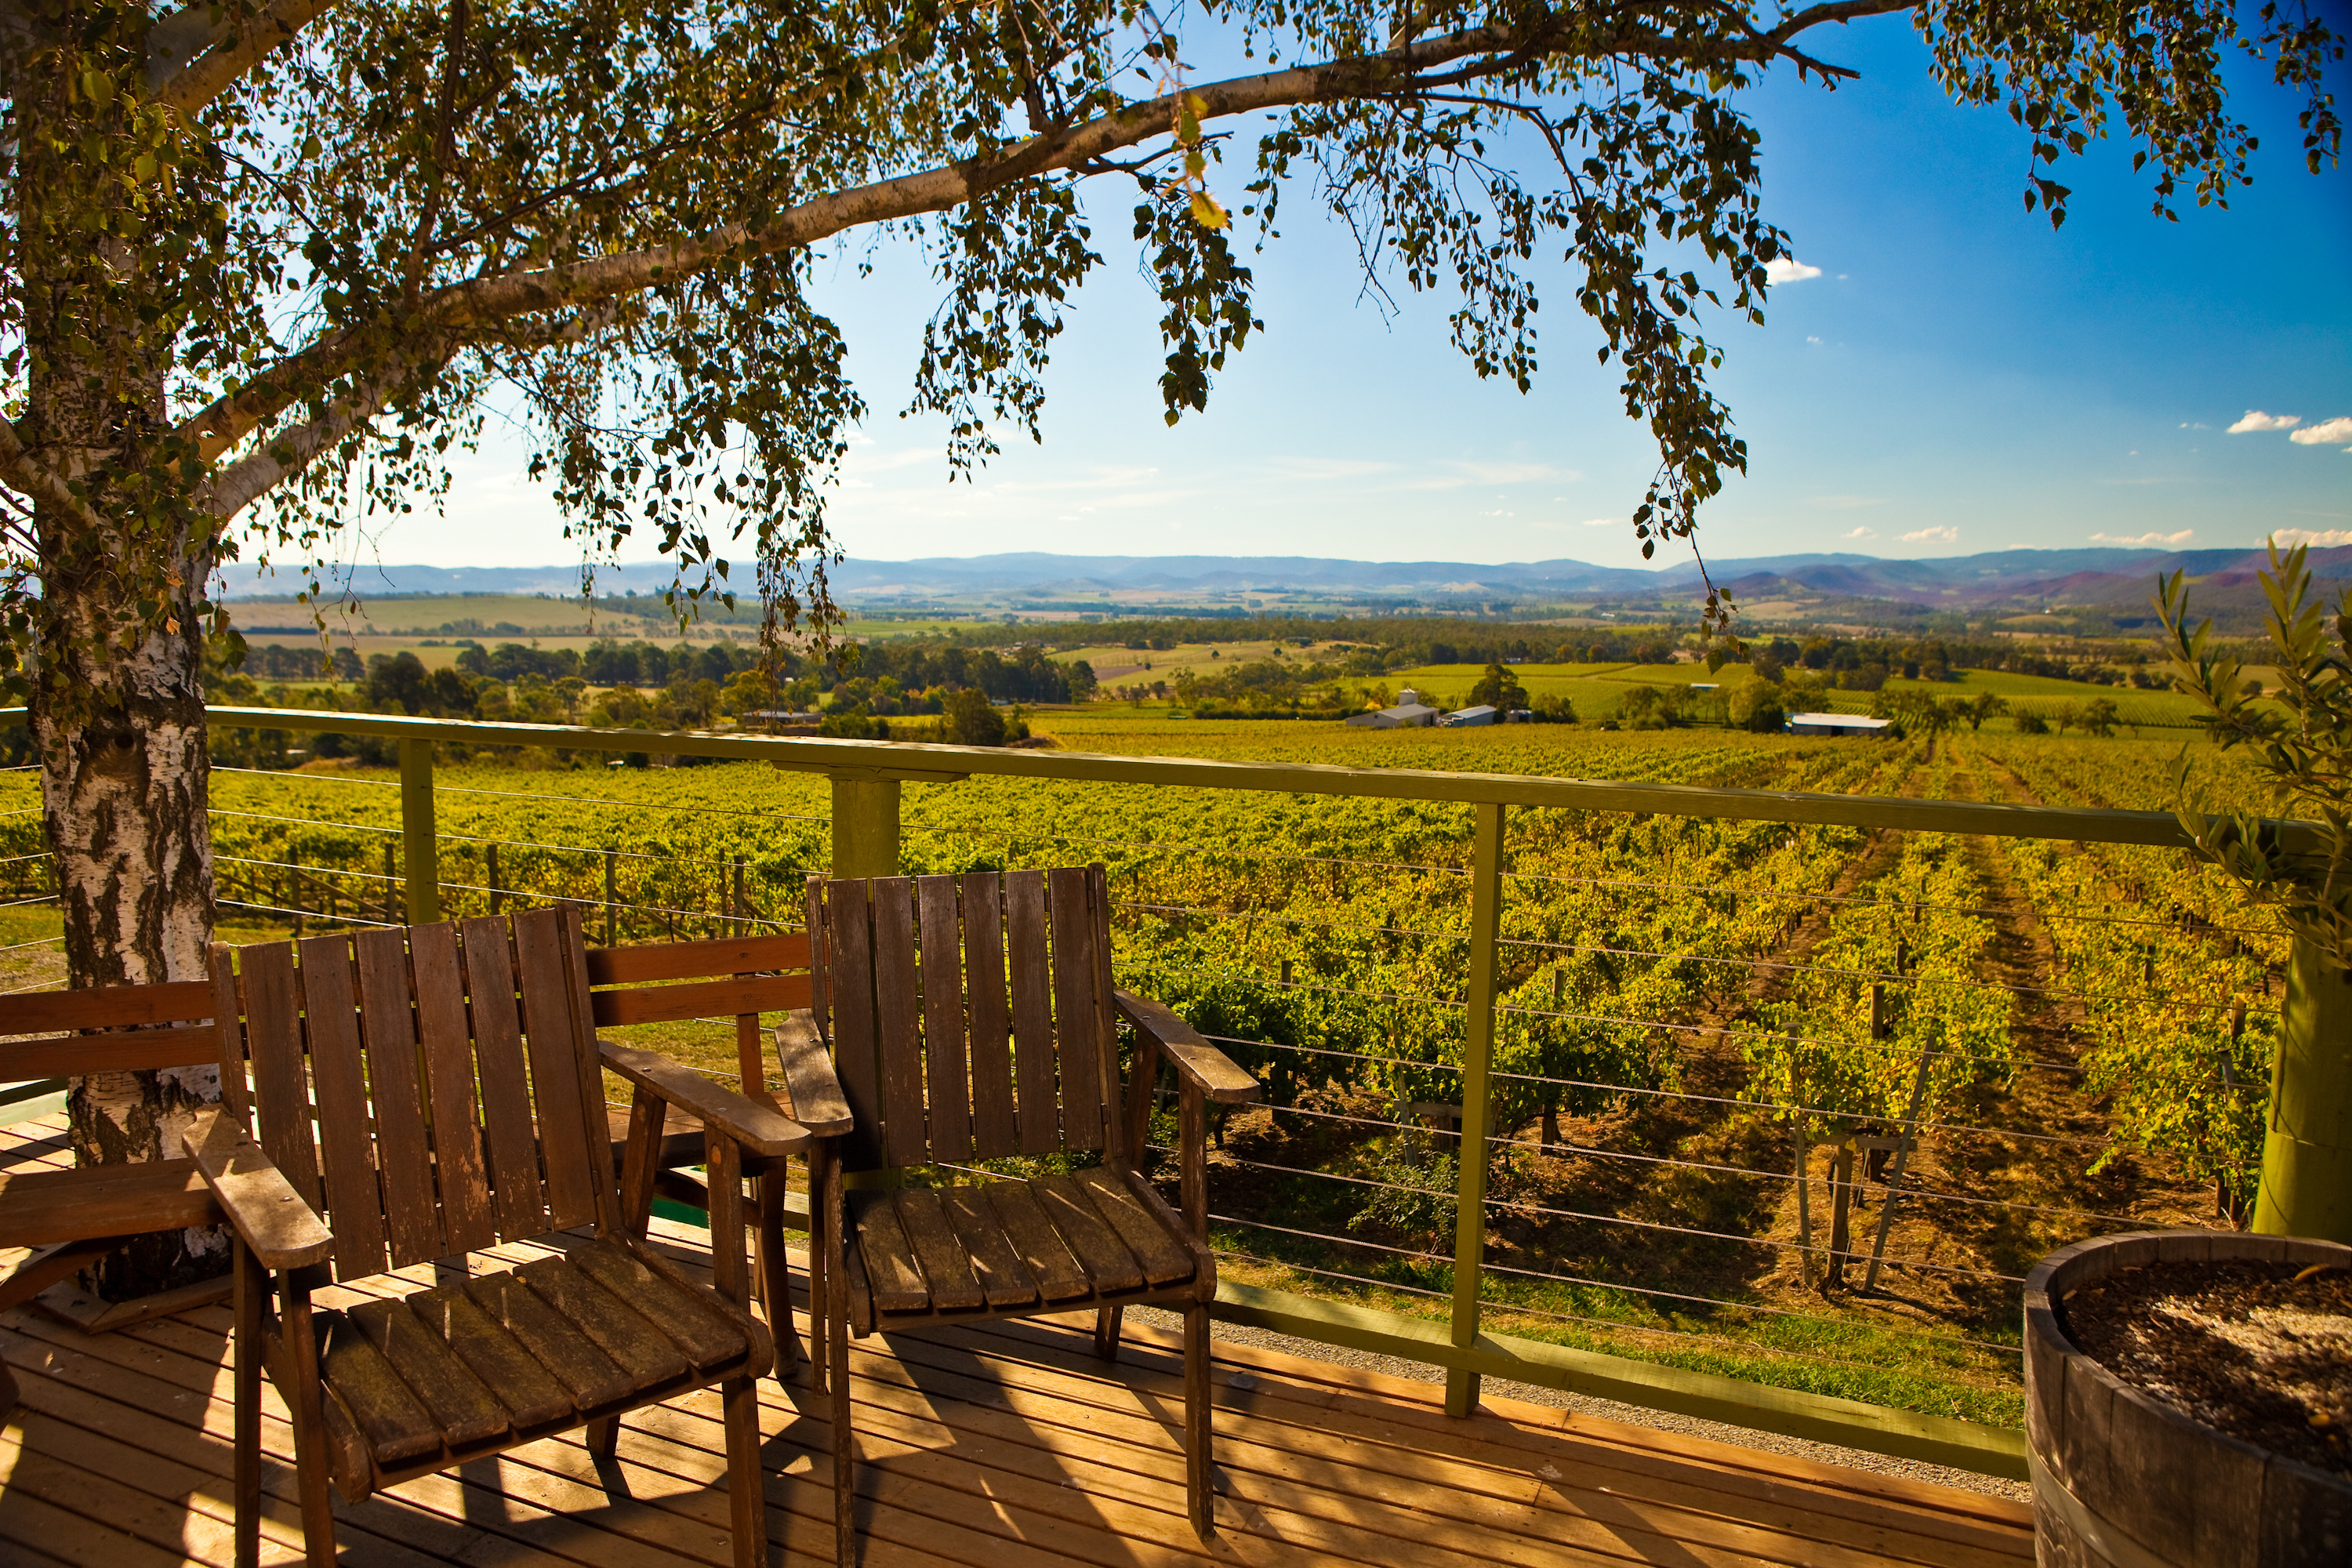 Southern hemisphere winery Warramante Winery Porch with view of Vineyard in Yarra Valley, Australia